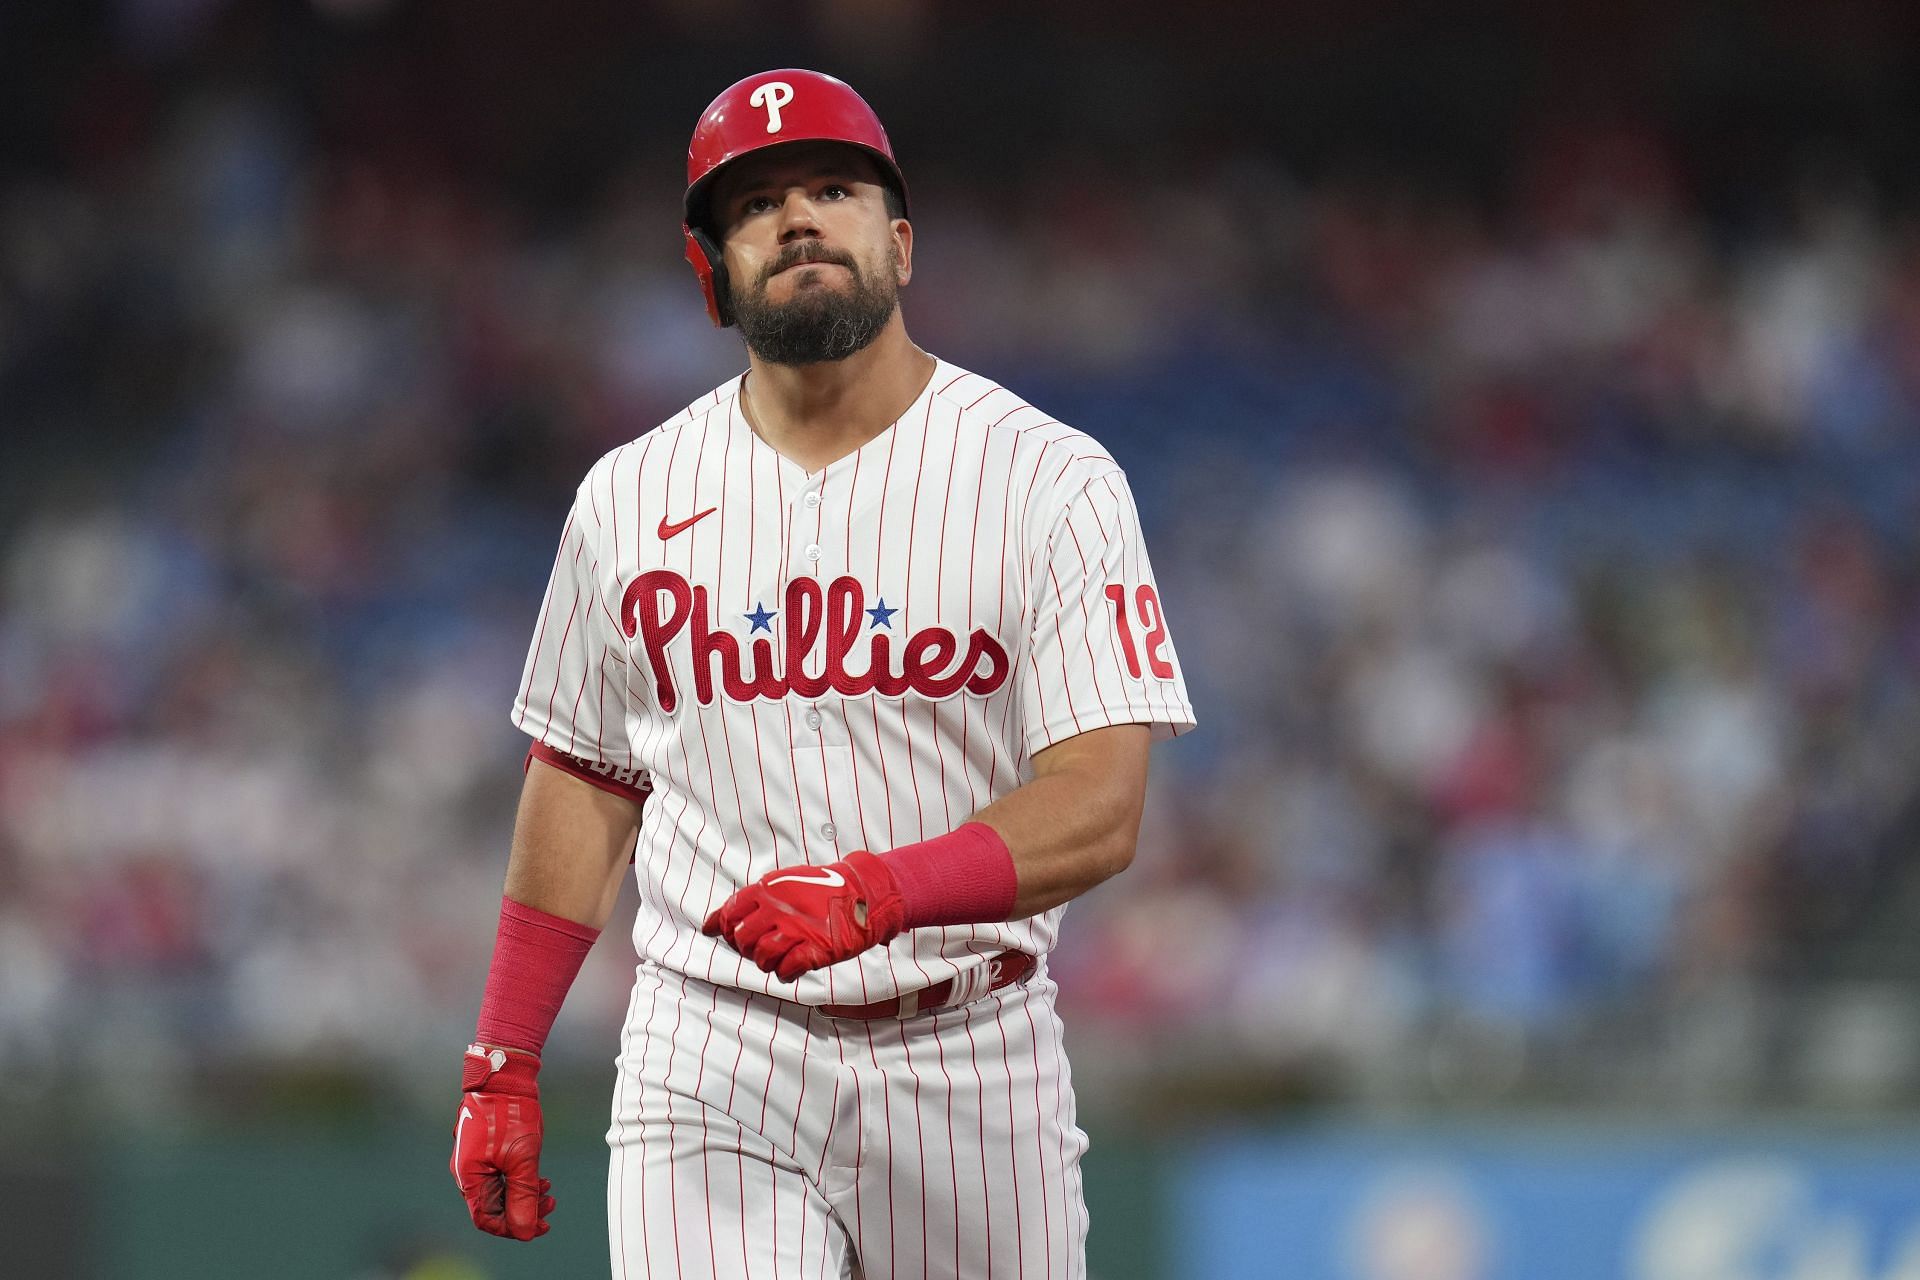 Kyle Schwarber will be the sole repersentative for the Phillies in the All-Star Game.